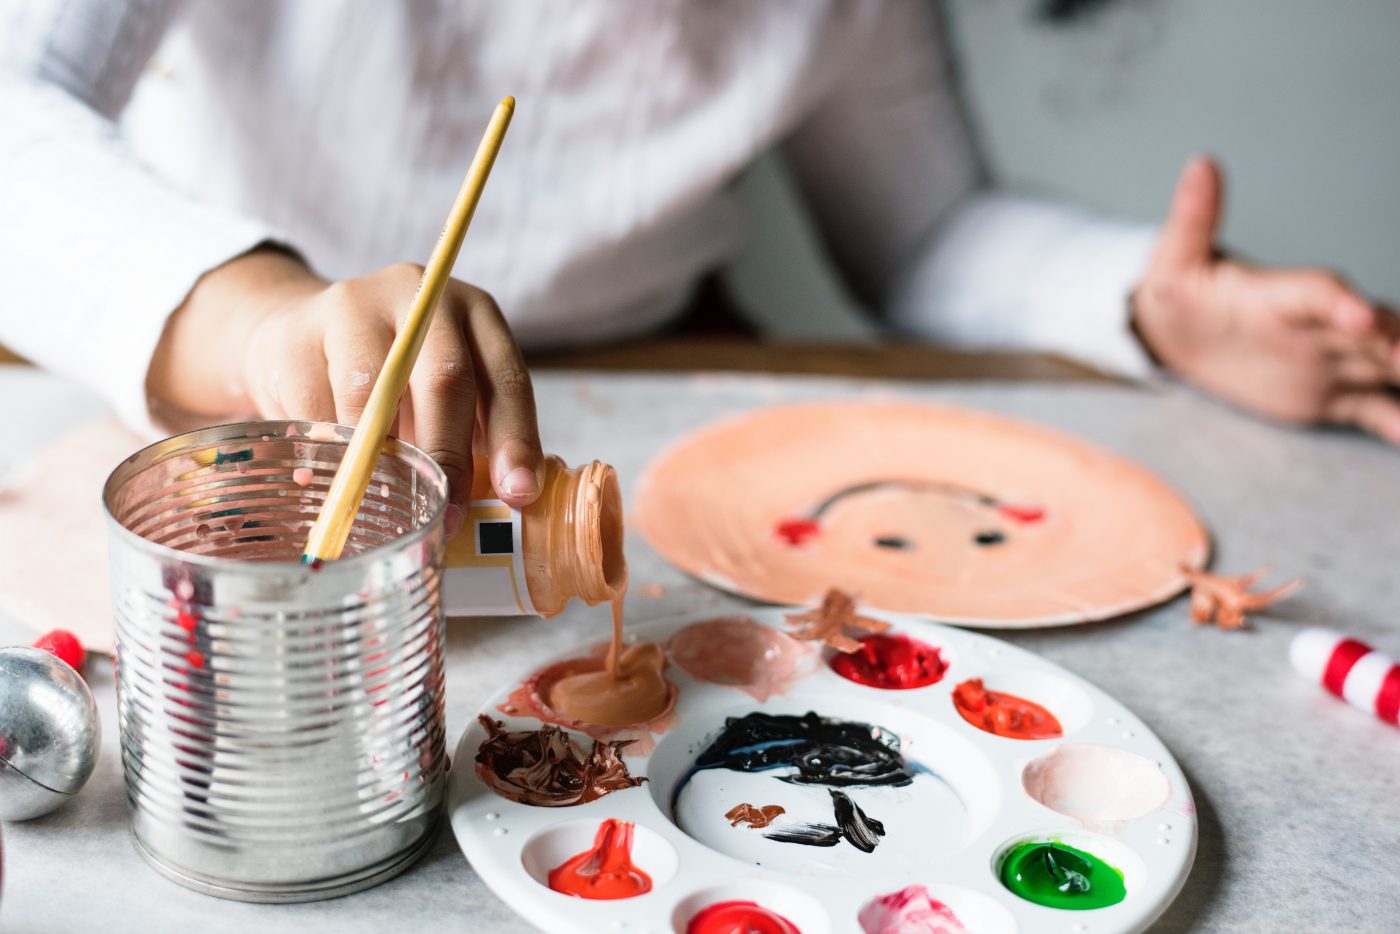 what's the connection between the arts and early childhood learning?